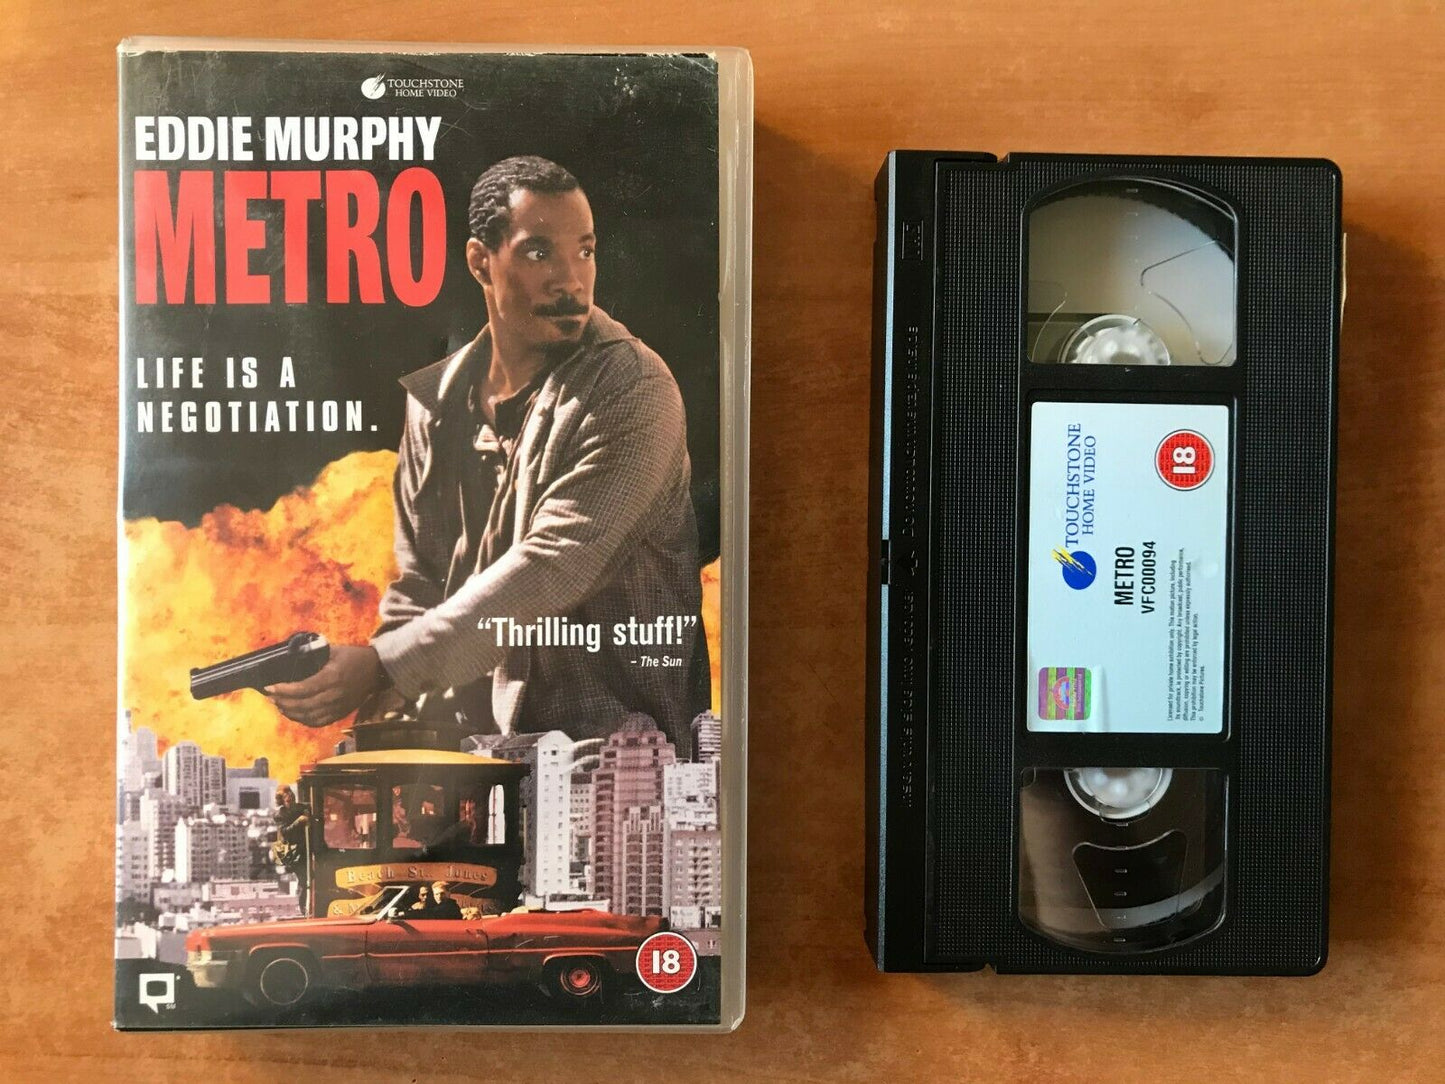 Metro (1997): Police Action - Crime Comedy [Large Box] Eddie Murphy - Pal VHS-